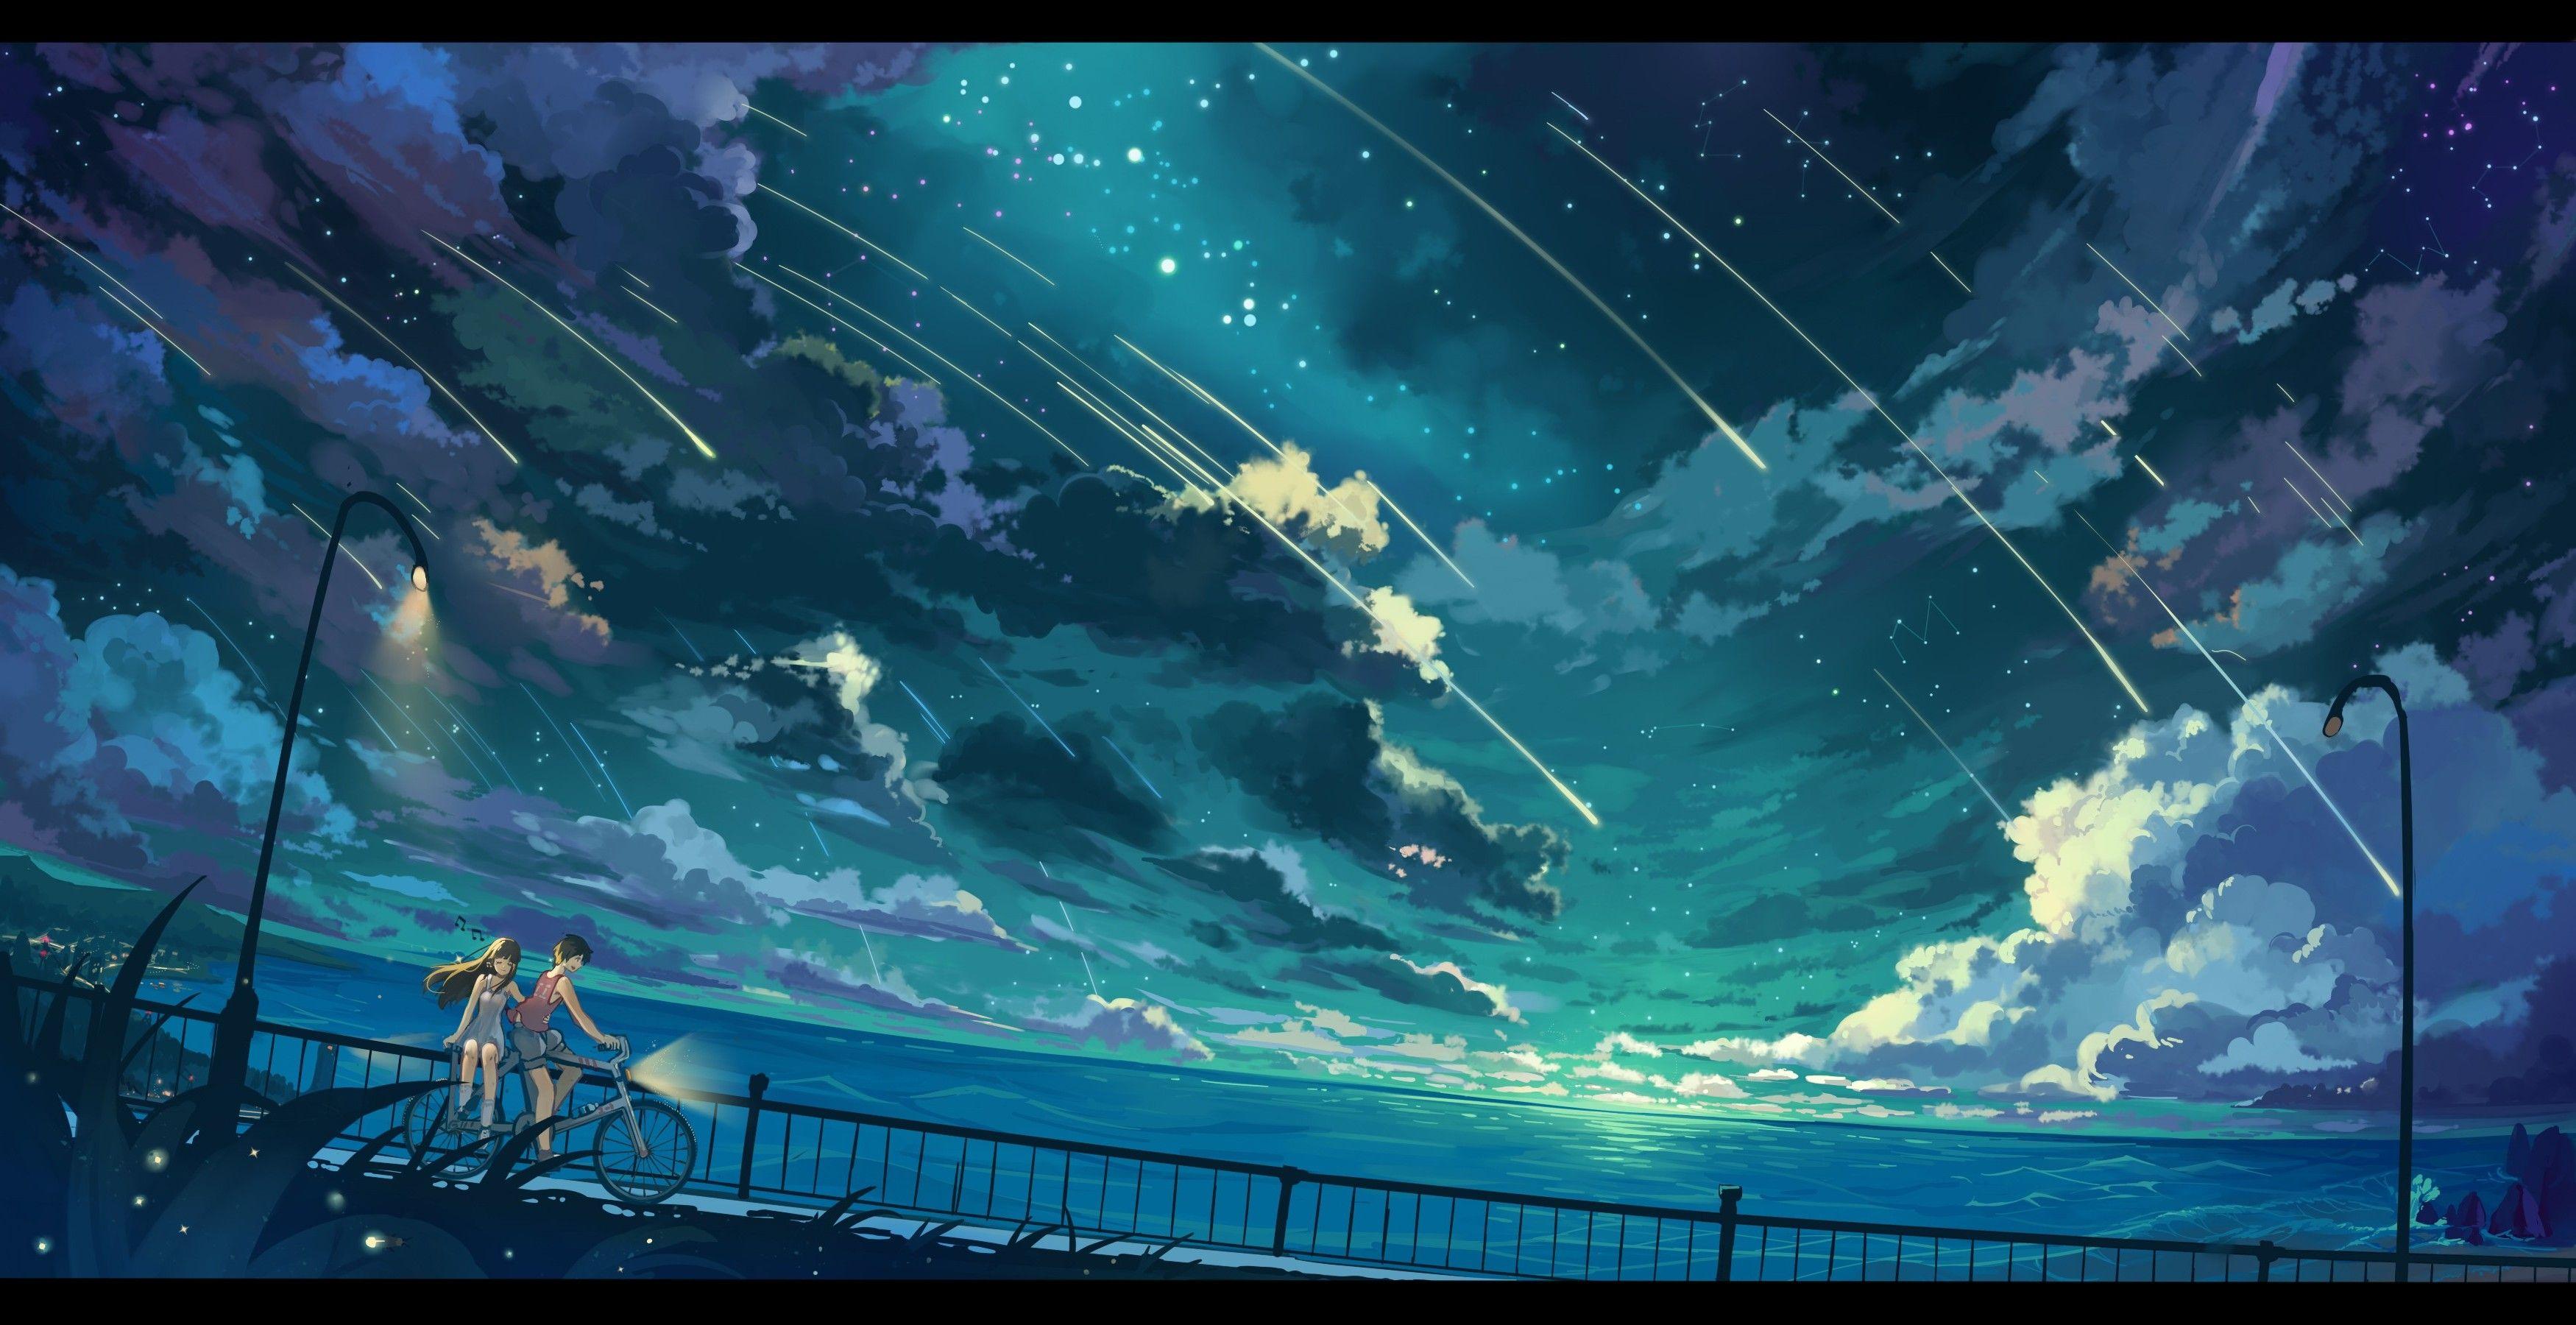 Wallpaper, anime girls, bicycle, sky, clouds, underwater, atmosphere, universe, ghost ship, screenshot, computer wallpaper, special effects, outer space, 3500x1800 px 3500x1800